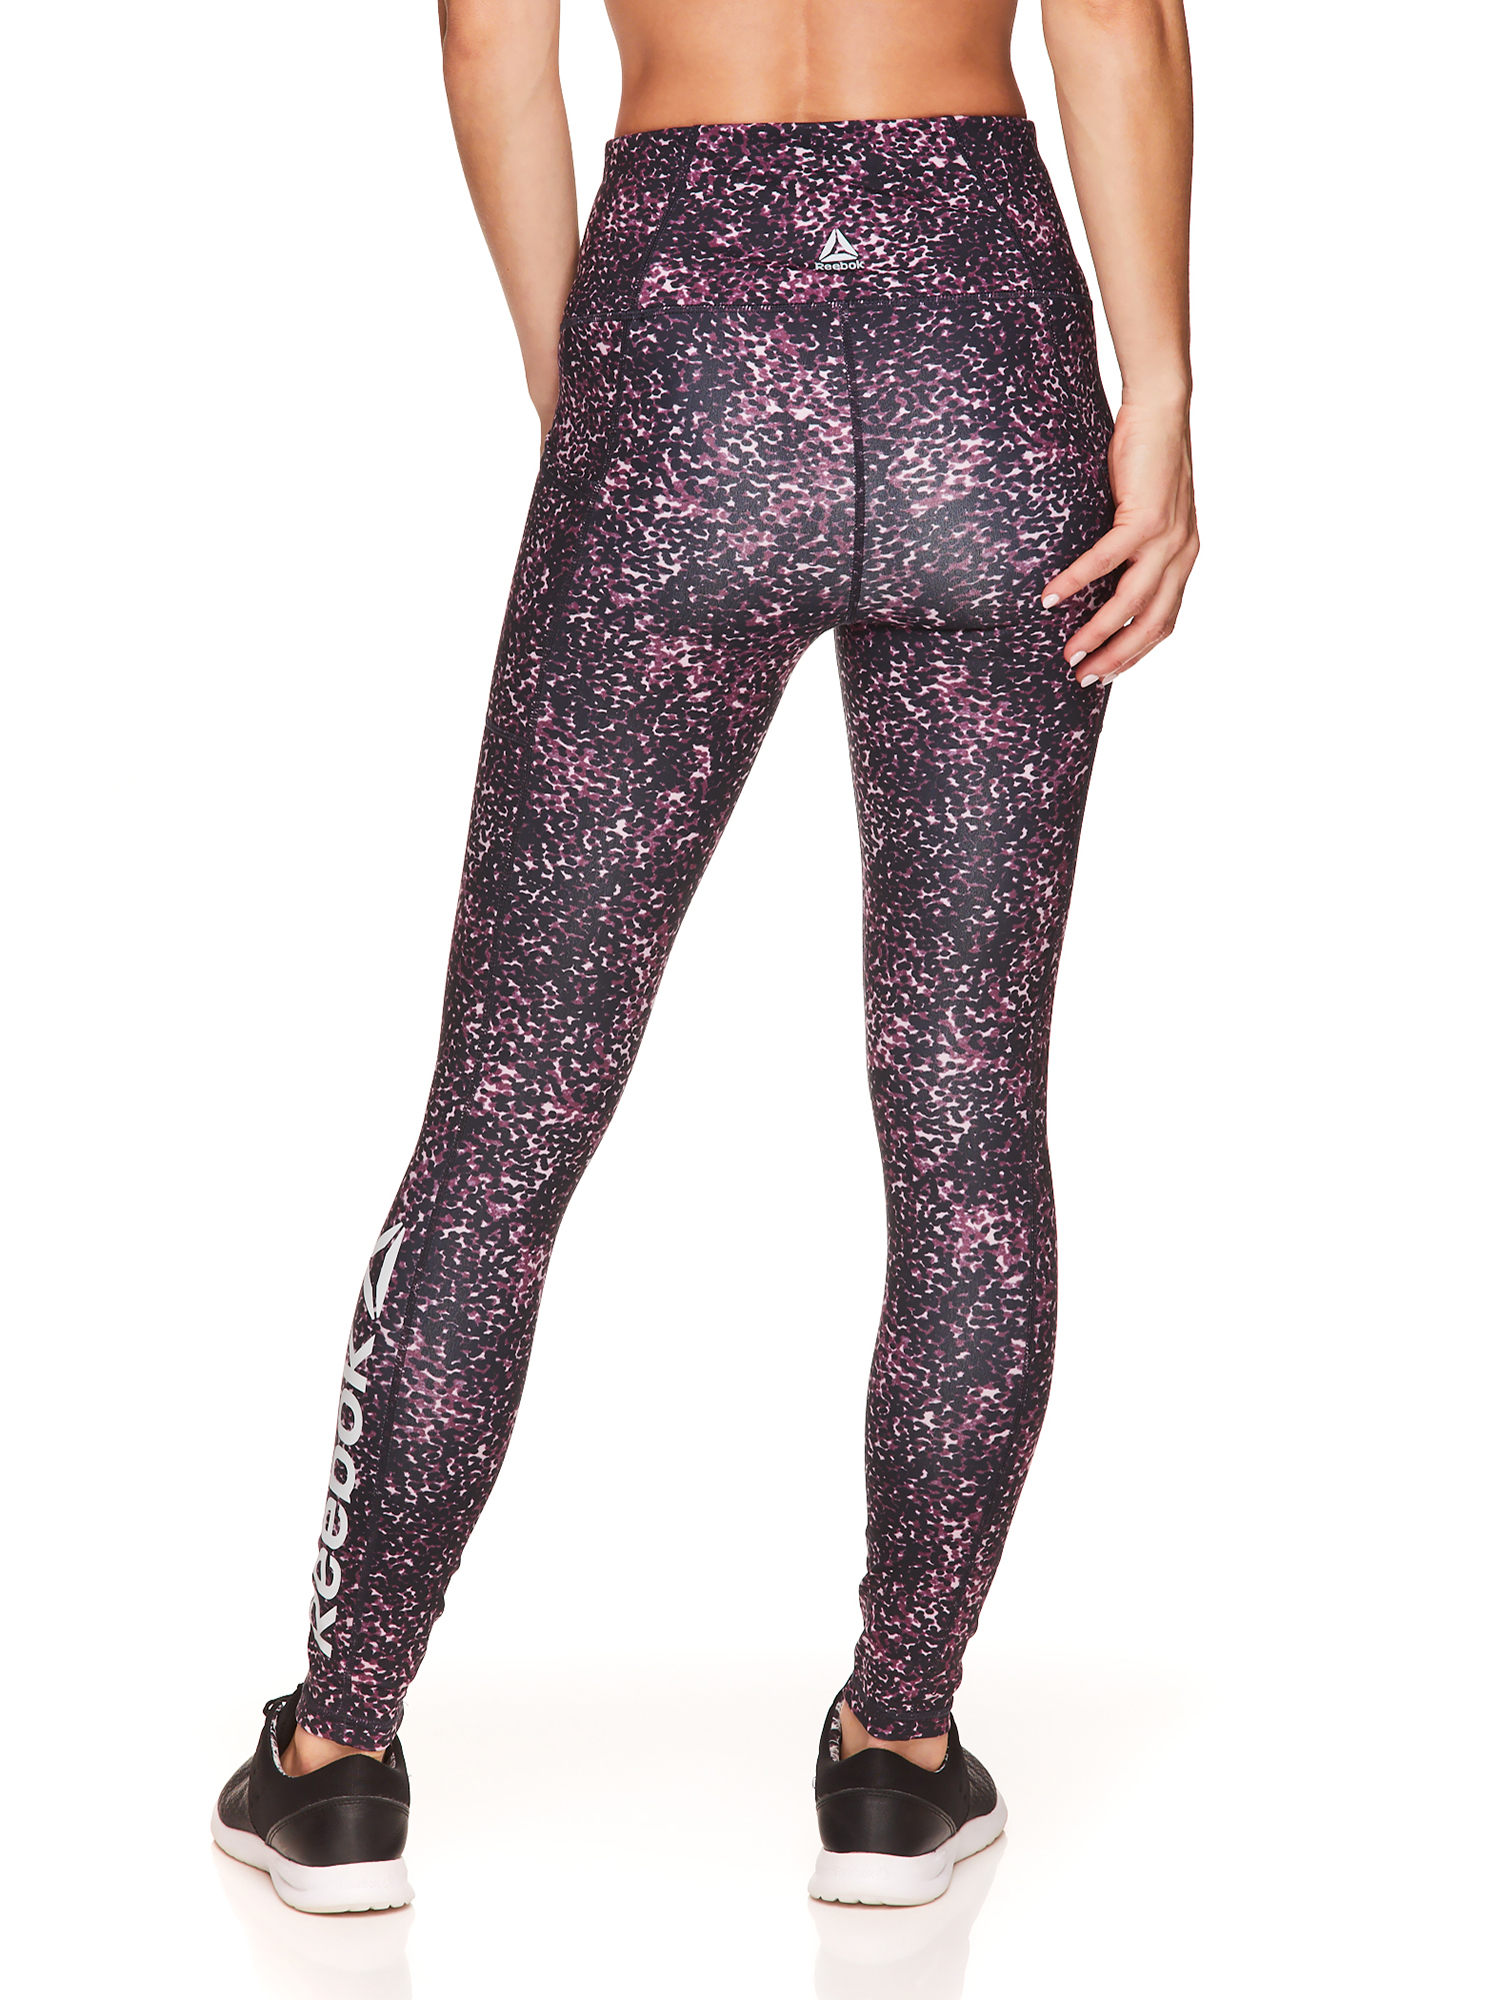 Reebok Womens High-Waisted Active Leggings with Pockets, Dotty Animal Graphic - image 2 of 4